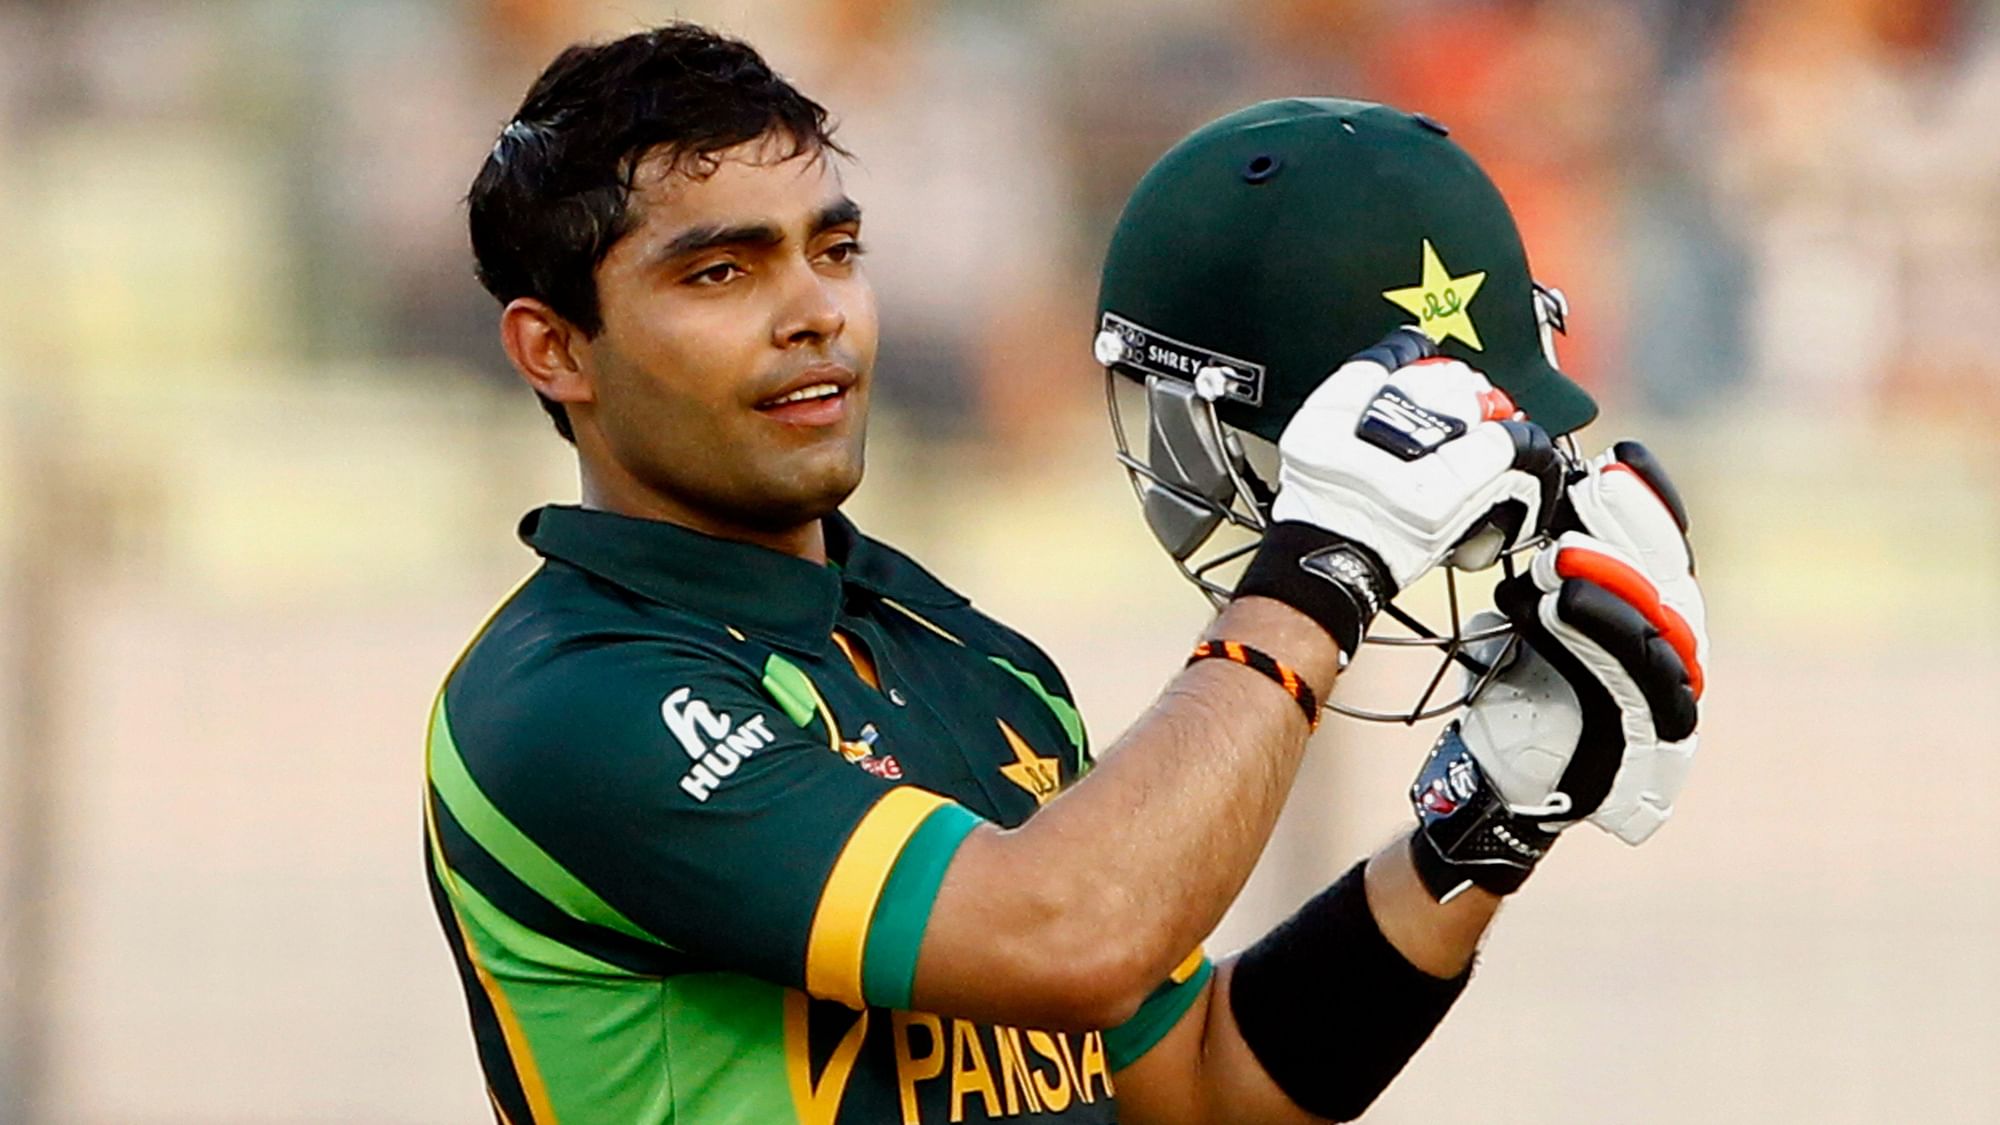 The PCB has charged middle-order batsman Umar Akmal for breaching its anti-corruption code.